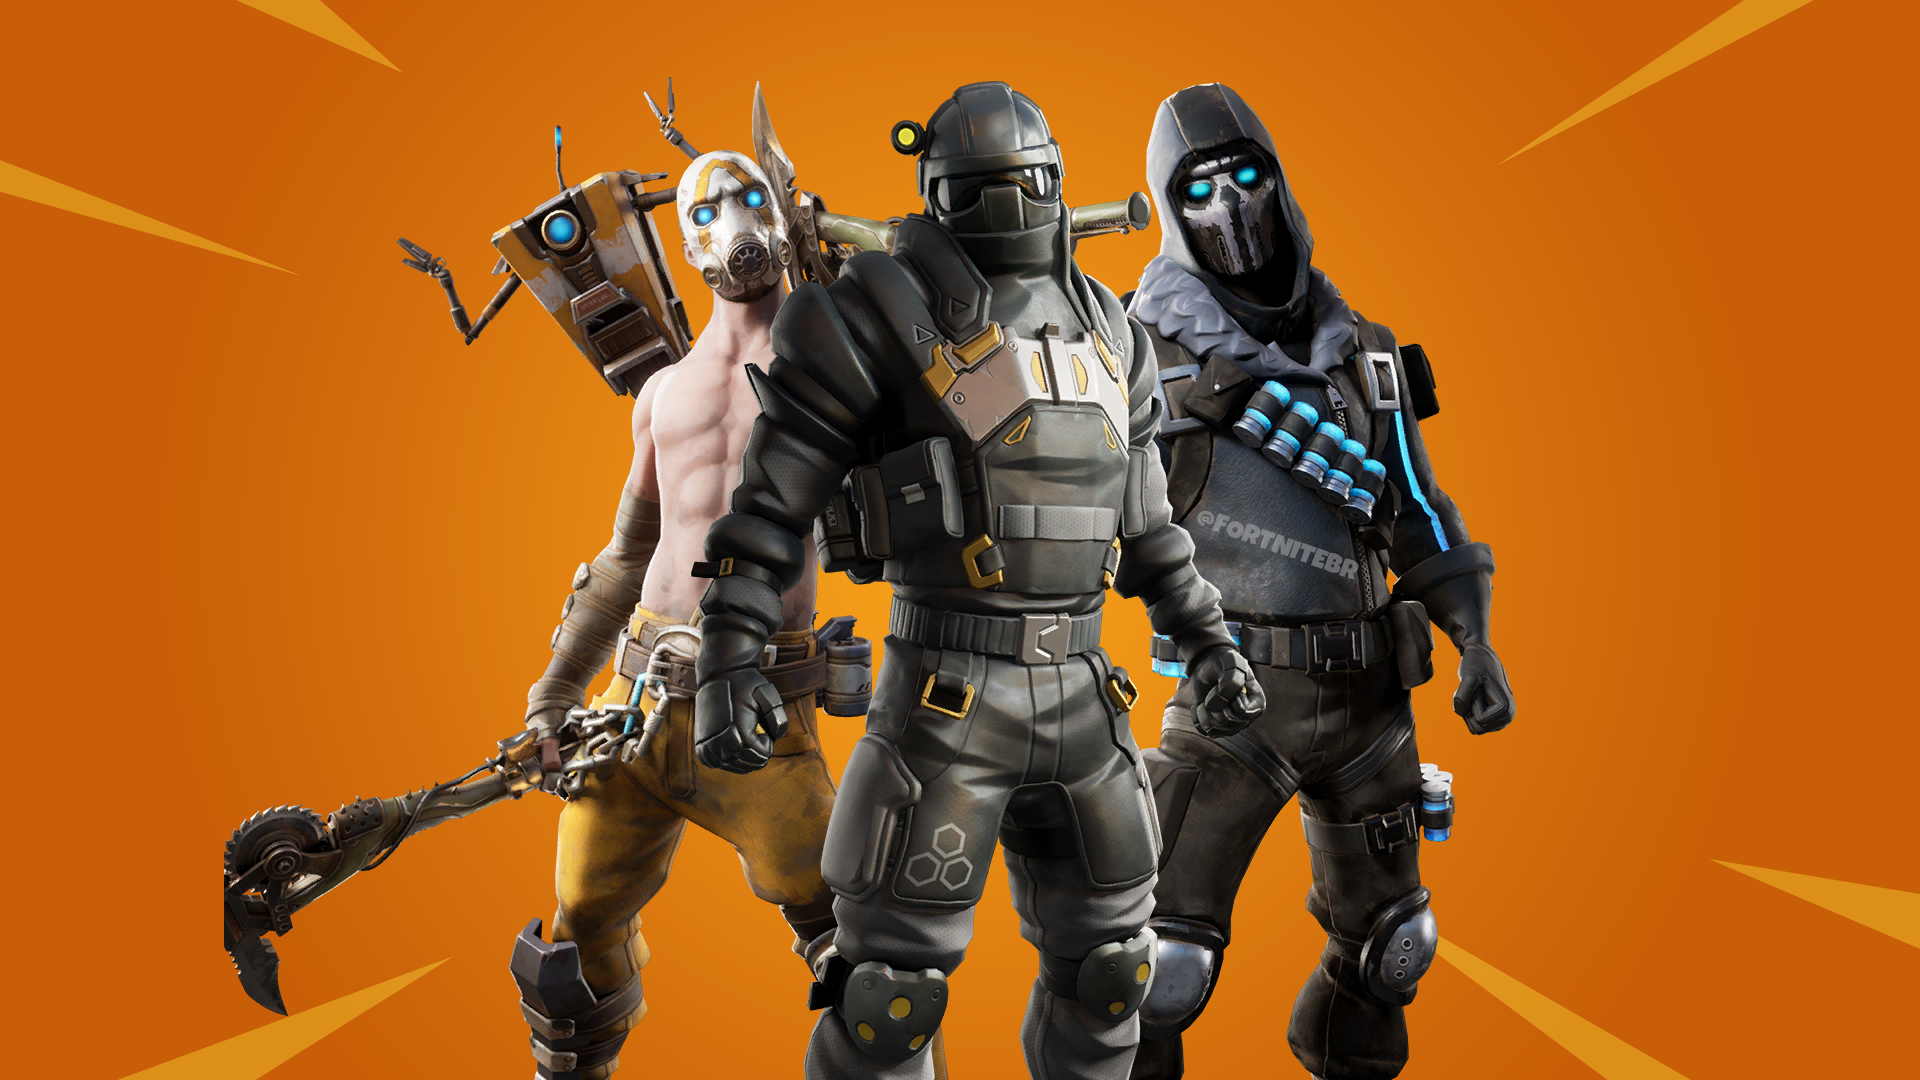 Fortnite Patch v10.20 - All Leaked Cosmetics (Skins, Emotes, Gliders, Wraps)